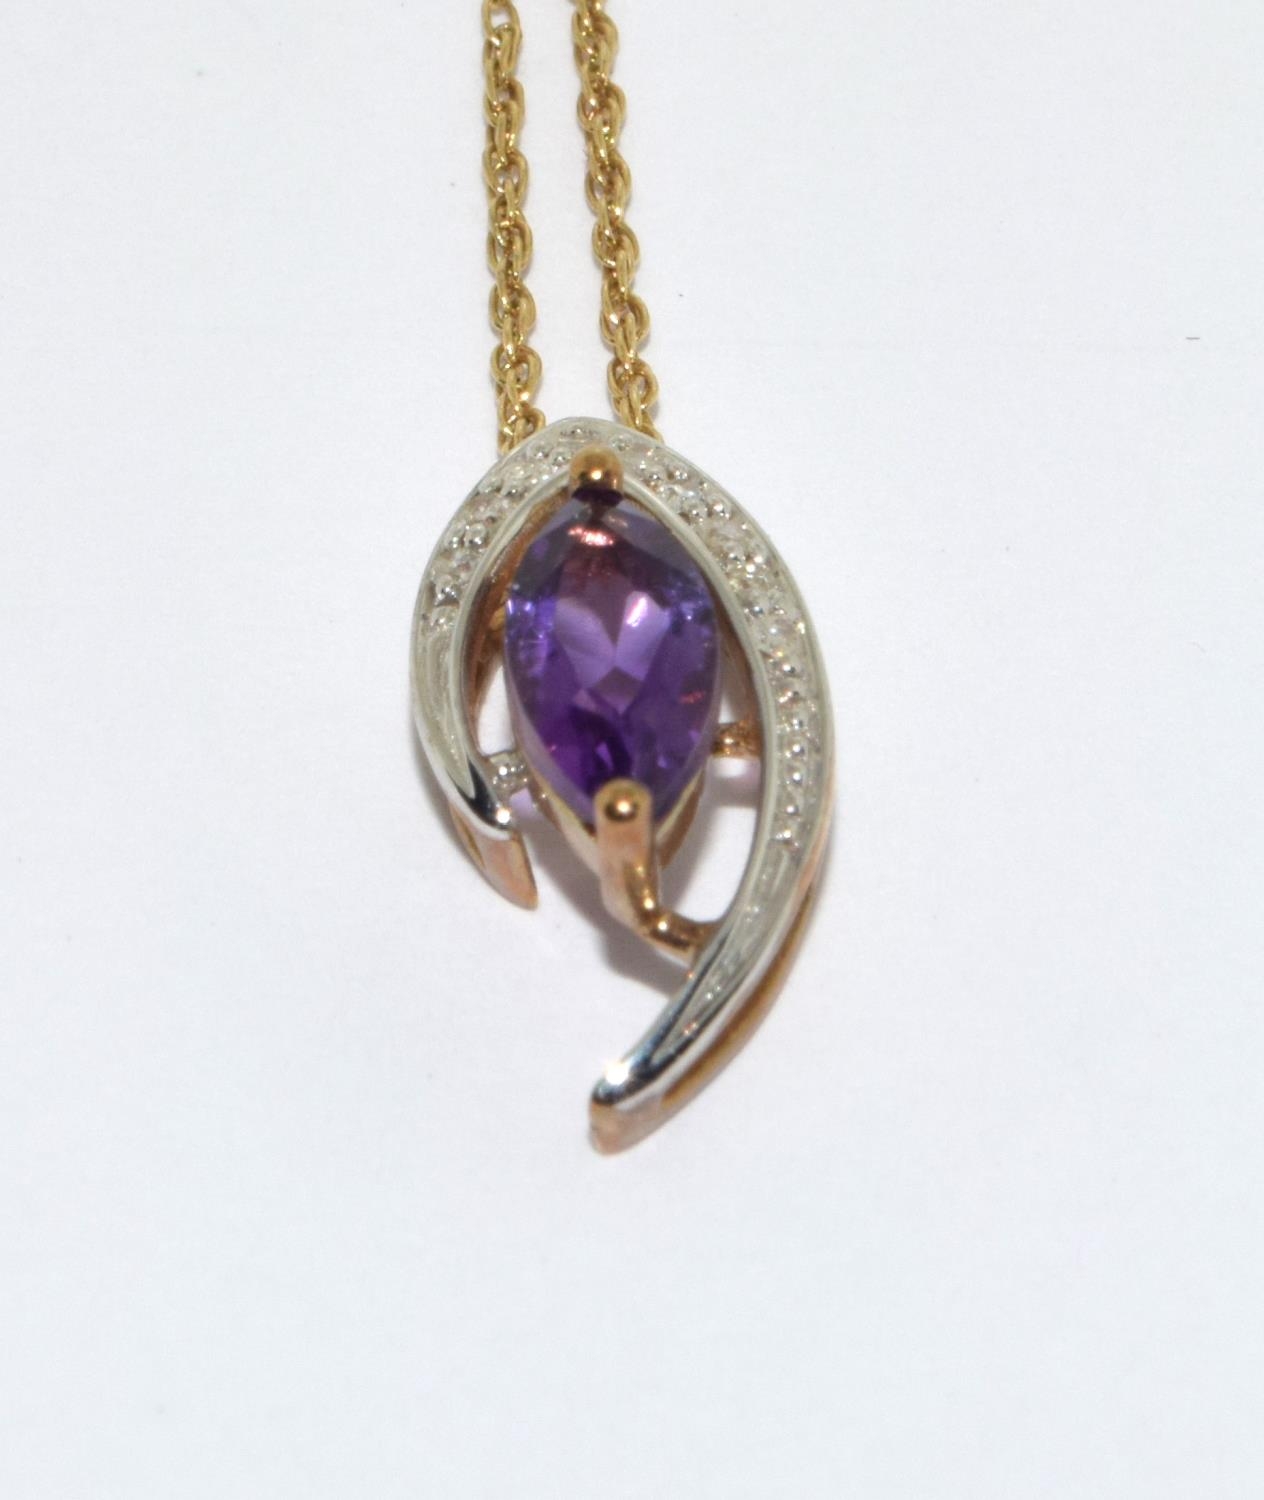 9ct Gold Diamond Marquise Cut Amethyst Earrings, Necklace & Ring Set. Size M - Image 7 of 9